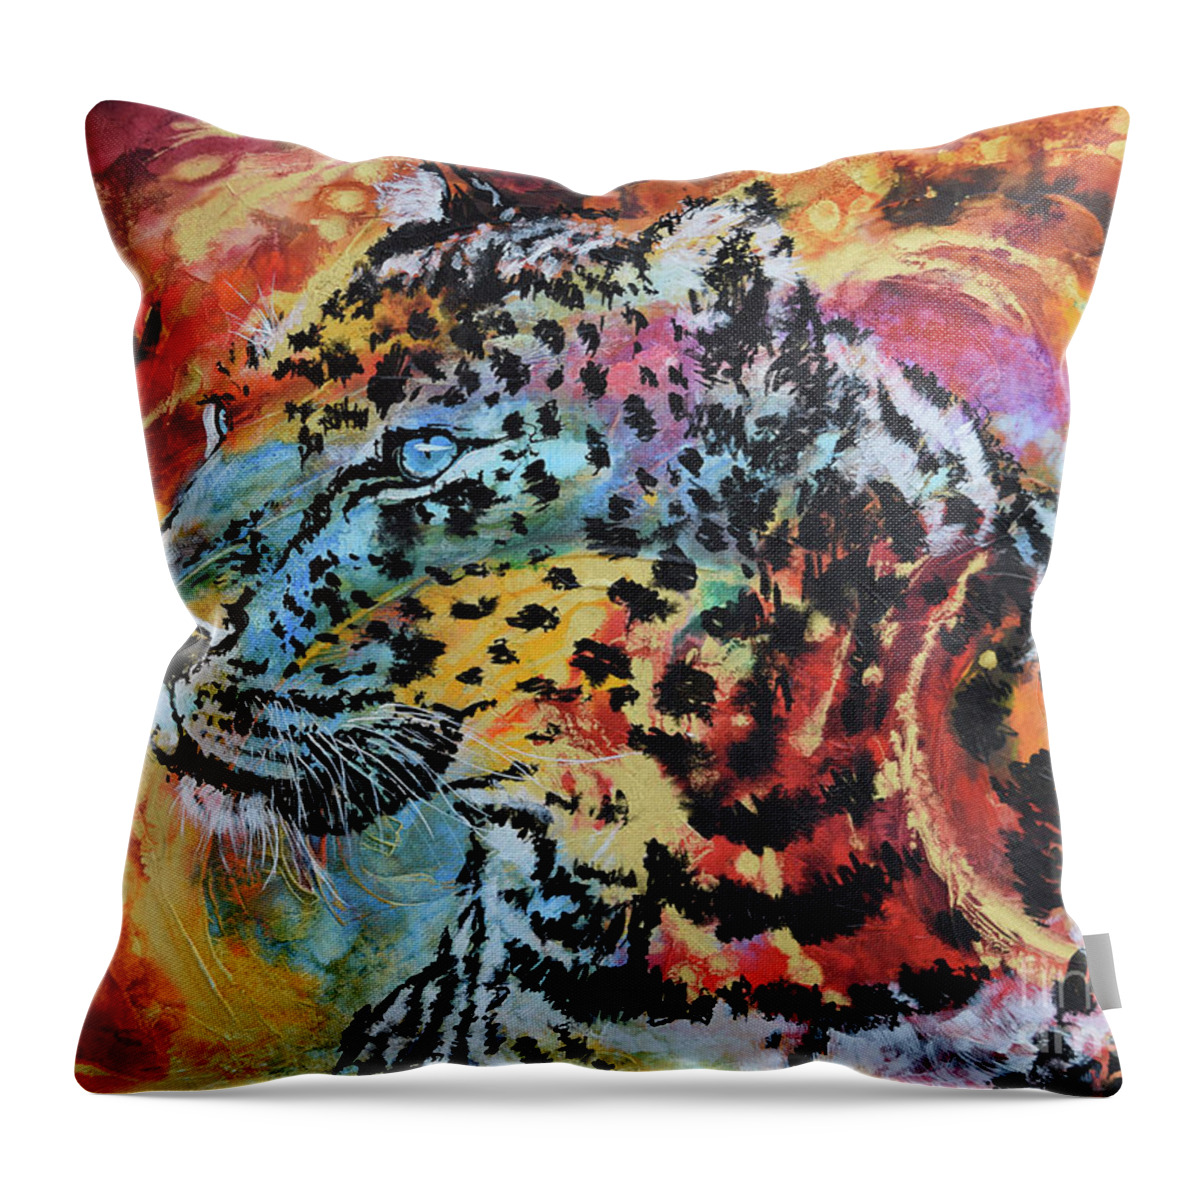 Leopard Throw Pillow featuring the painting Fiery Gaze by Jyotika Shroff